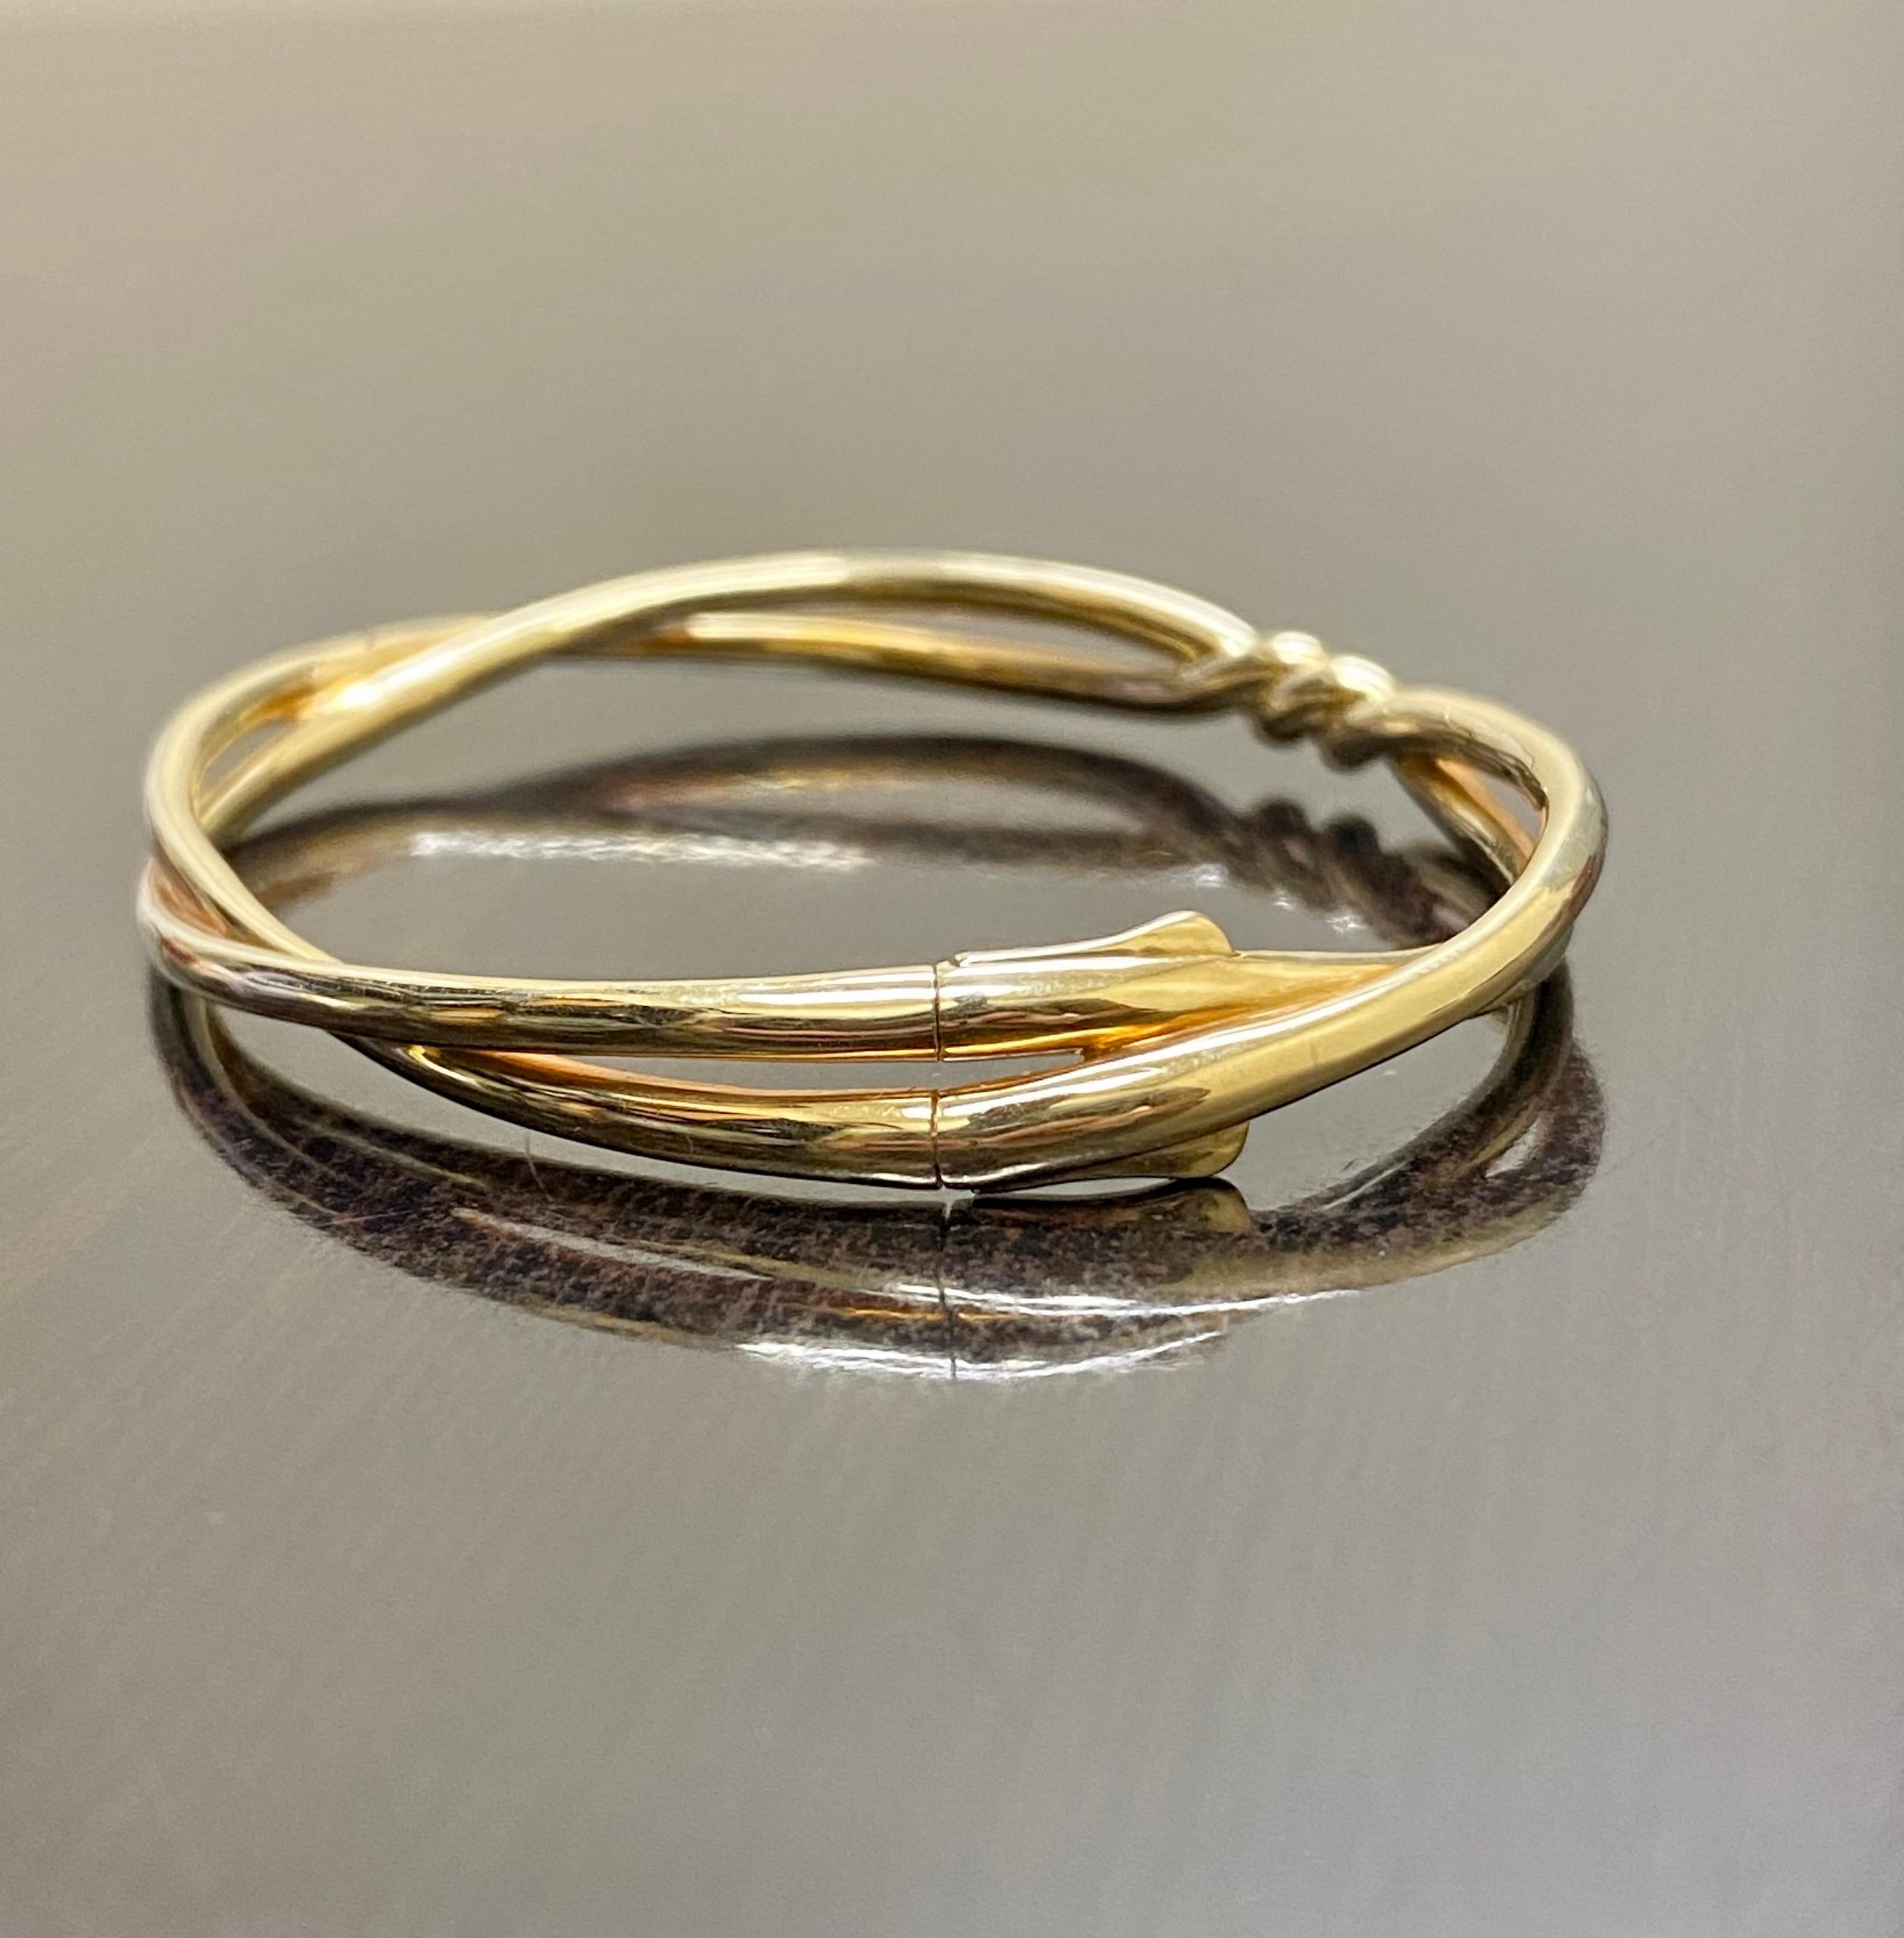 18K Yellow Gold Continuance Center Twist David Yurman Bracelet In Excellent Condition For Sale In Los Angeles, CA